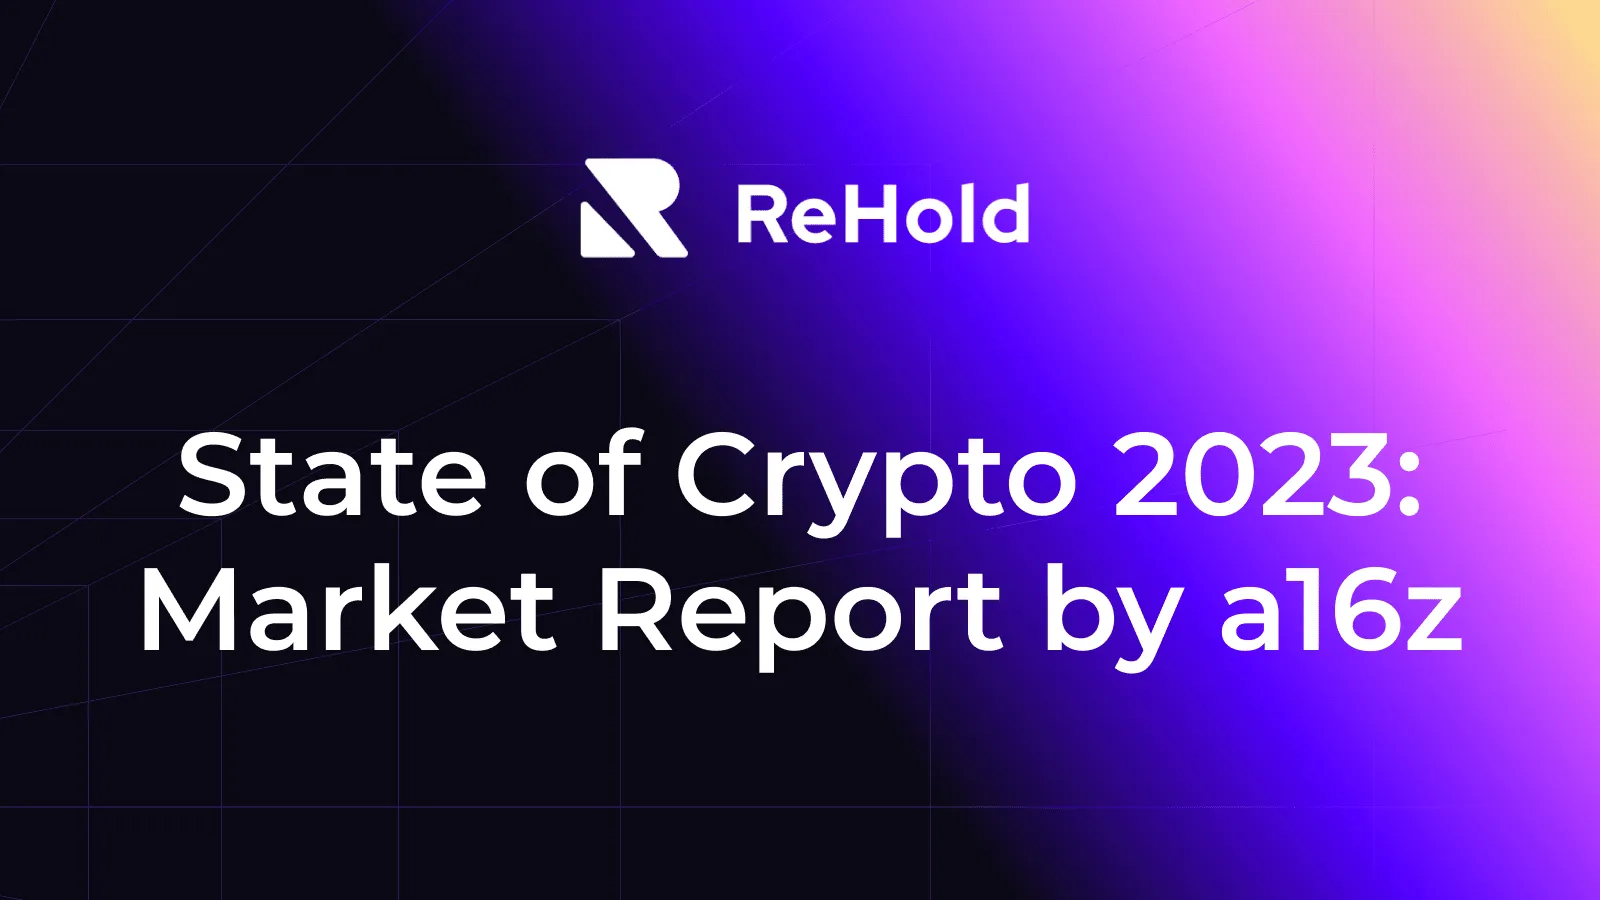 State of Crypto 2023: Market Report by a16z